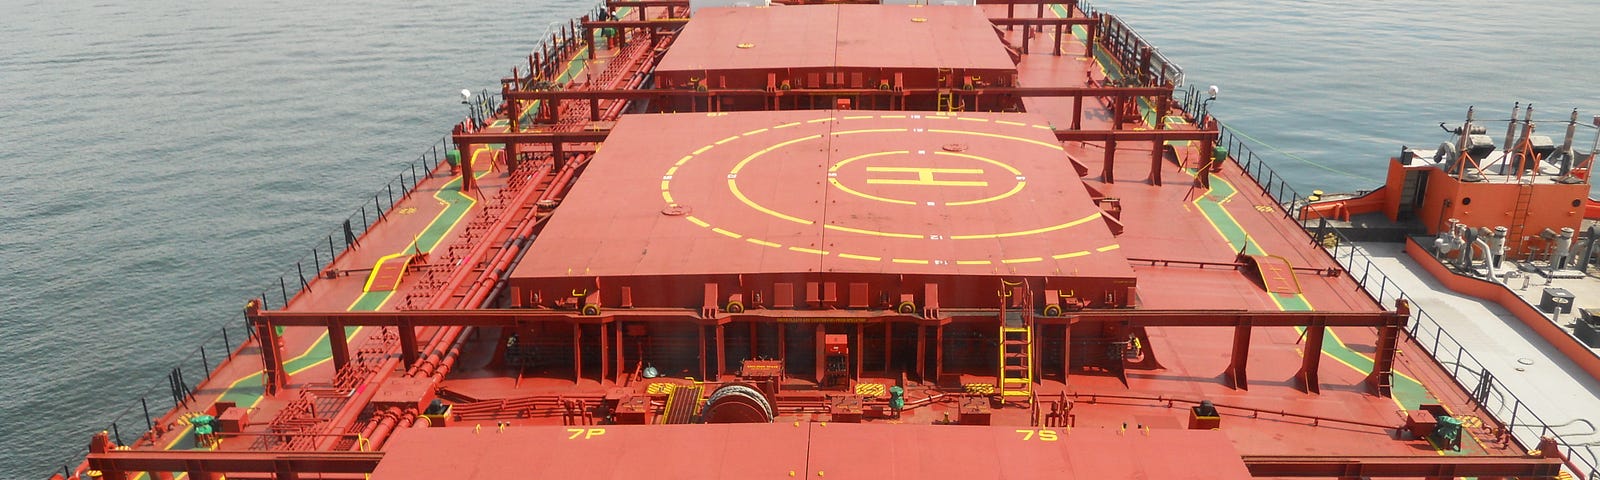 Orange colored massive holds of a cargo ship are shown